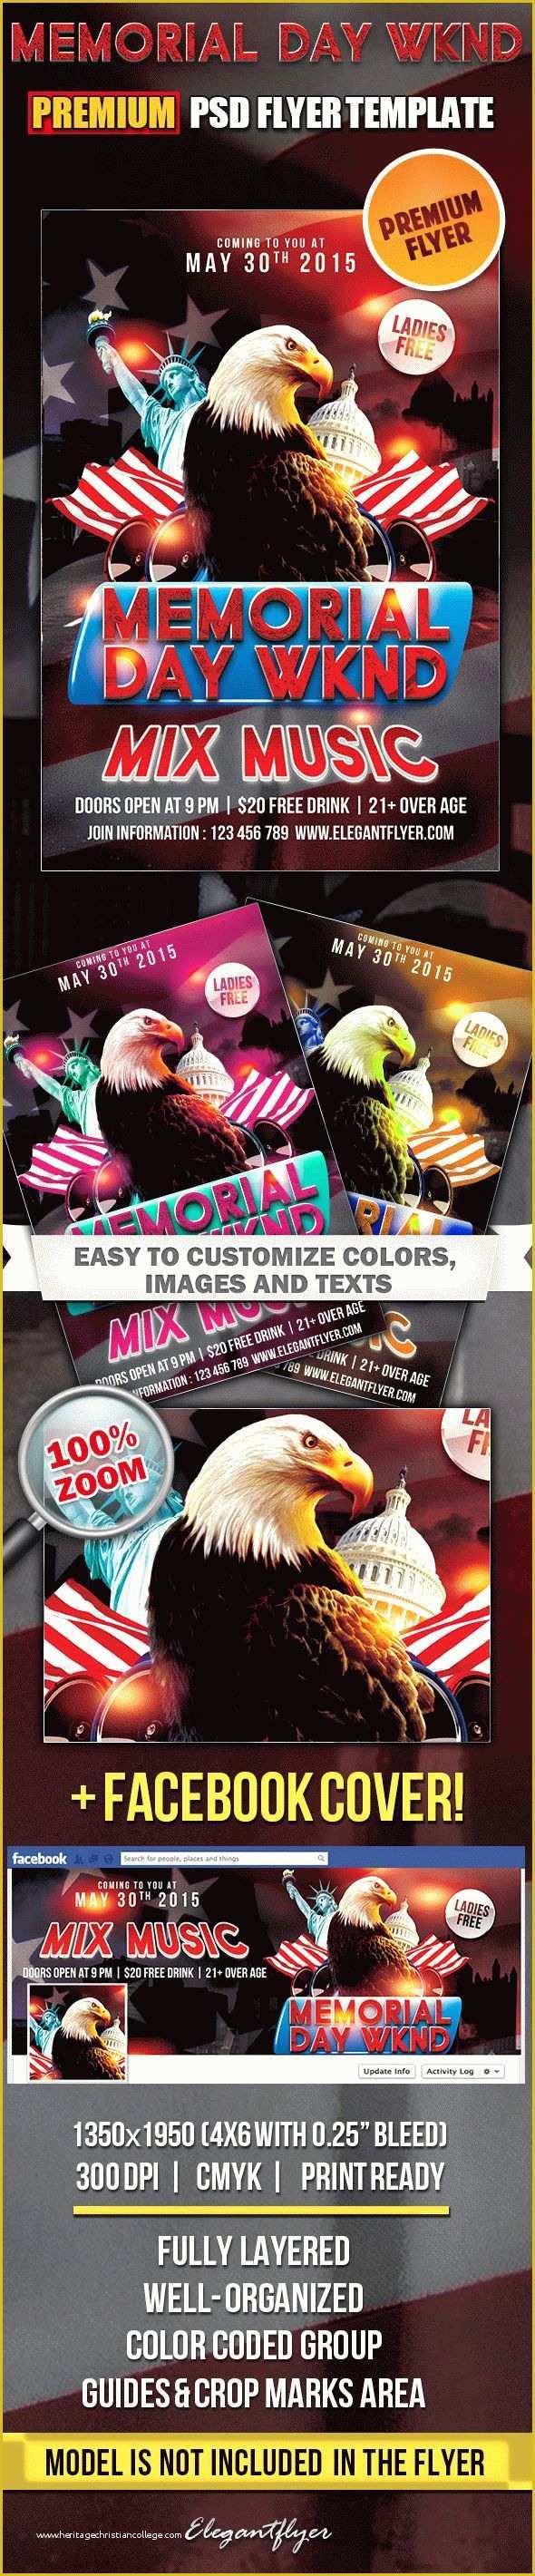 Free Funeral Flyer Template Psd Of Memorial Day Wknd – Flyer Psd Template – by Elegantflyer